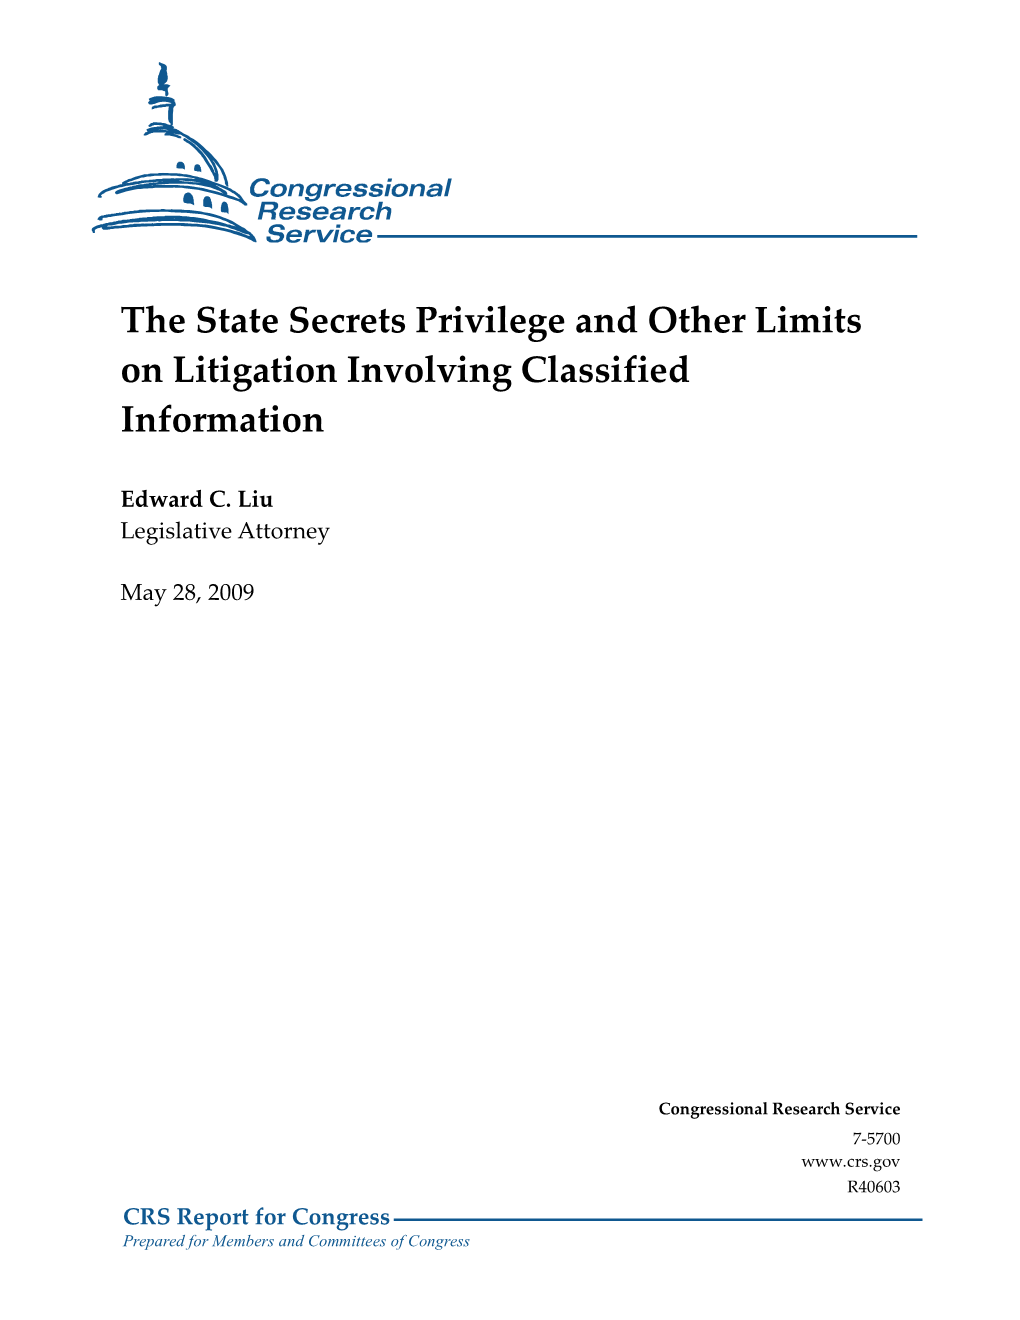 The State Secrets Privilege and Other Limits on Litigation Involving Classified Information